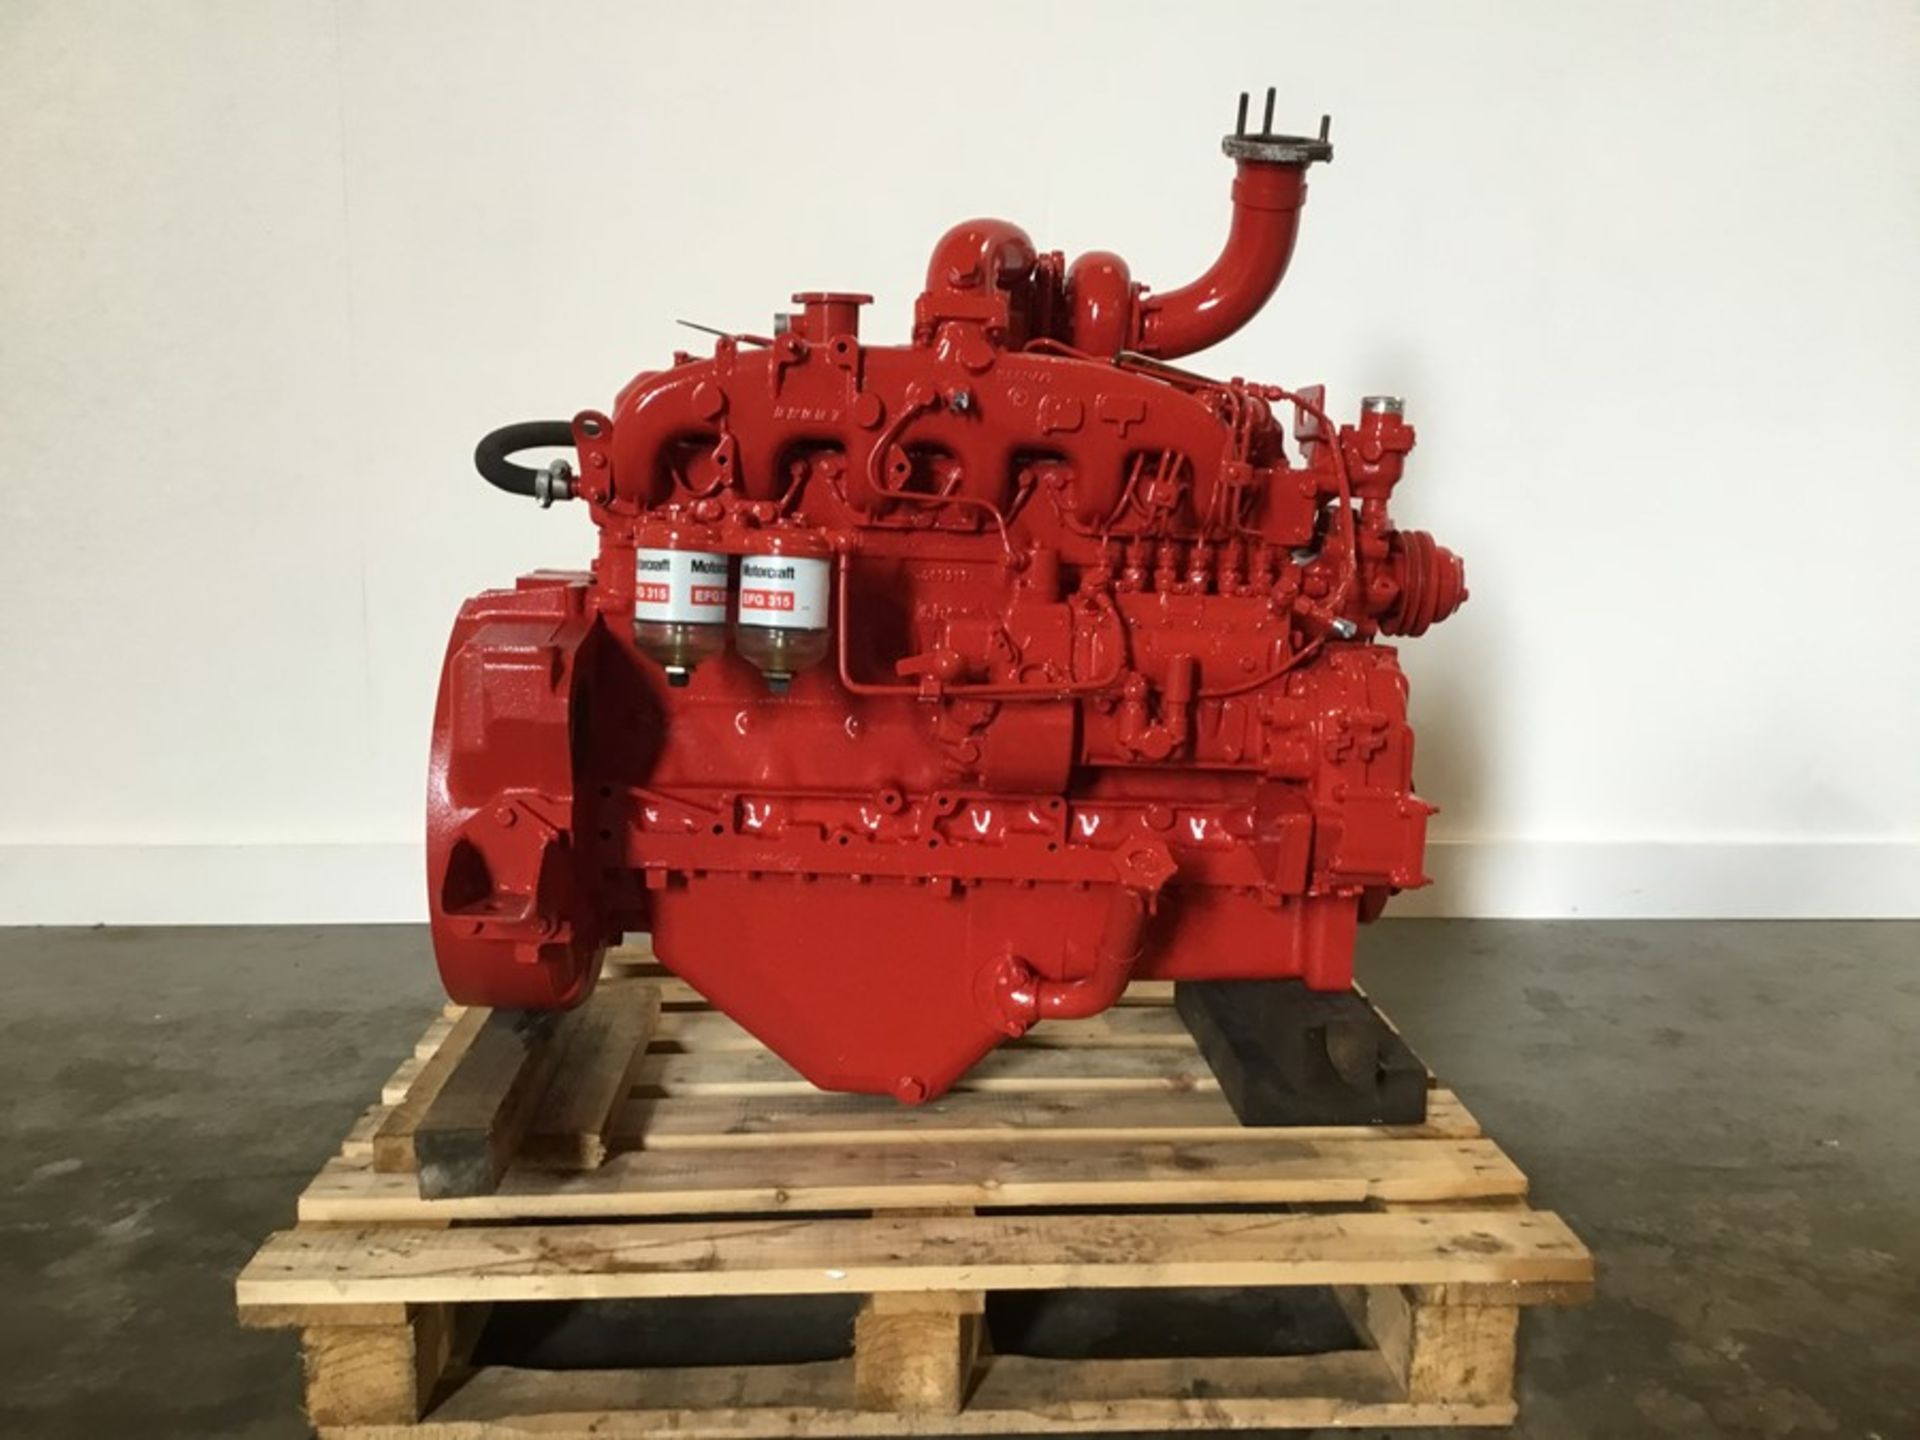 Iveco 80.61 Diesel engine: Iveco 8061.24 6Cyl Turbo serial number 8061.04-051-763363* number Ex fire